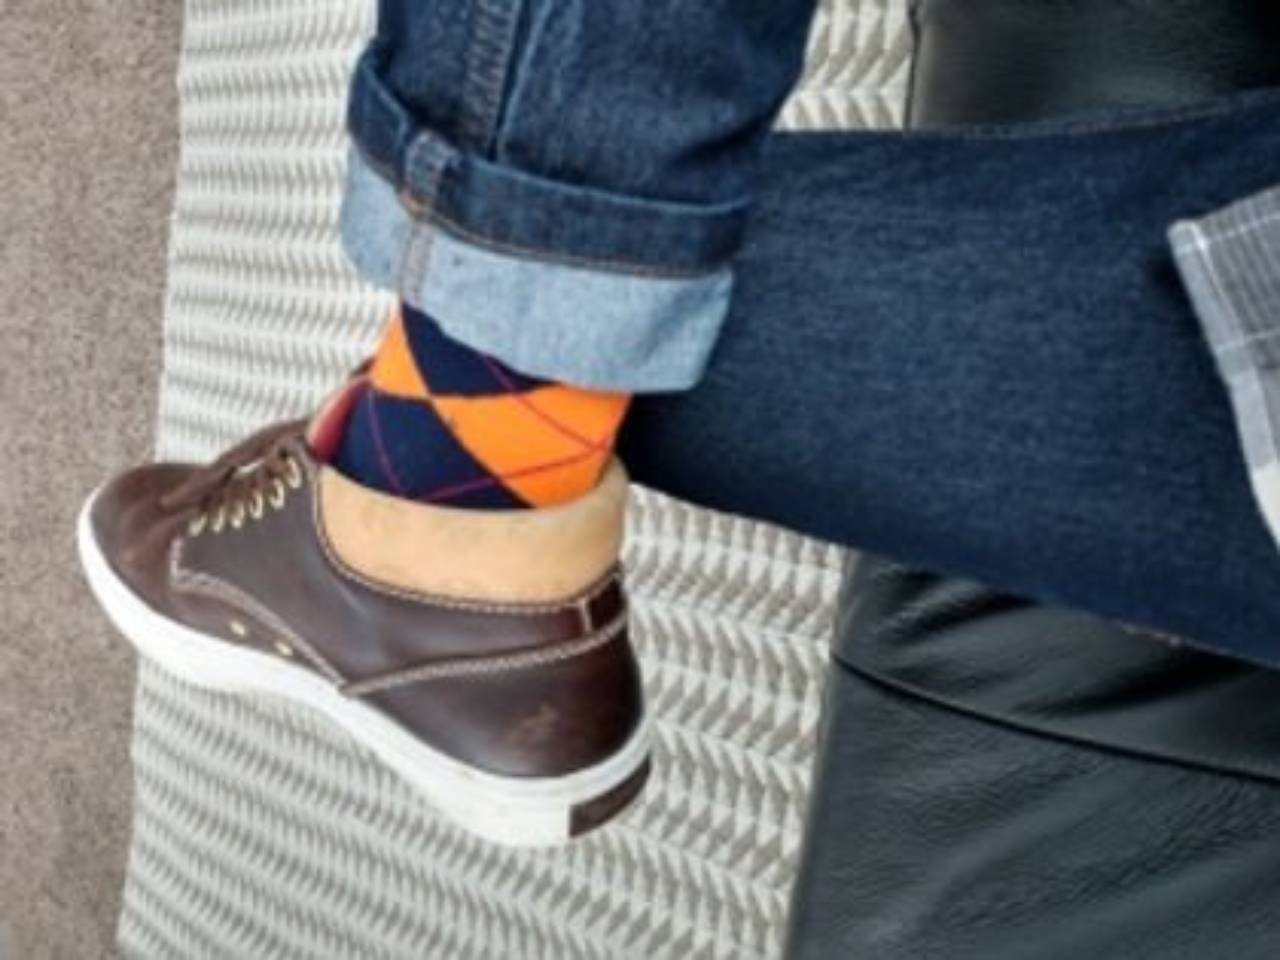 Person Wearing Socks Showing Under Jeans